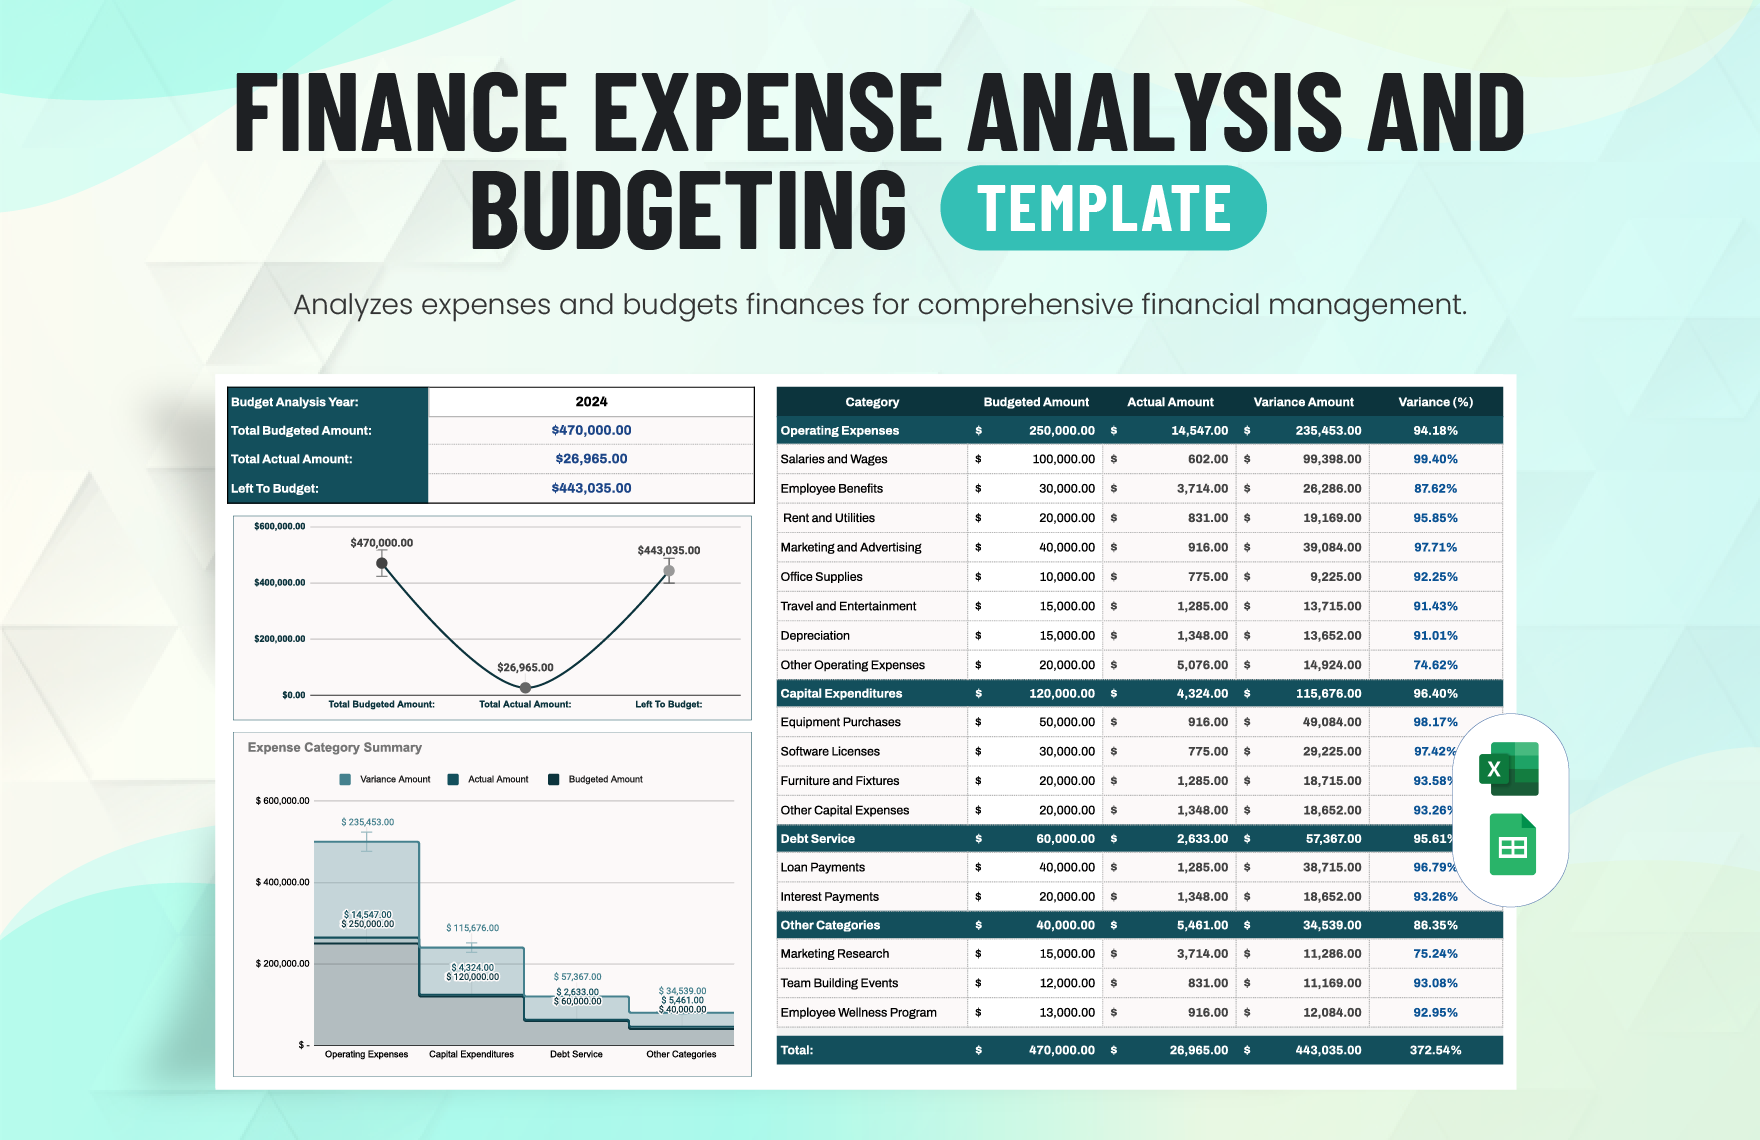 Finance Expense Analysis and Budgeting Template in Excel, Google Sheets